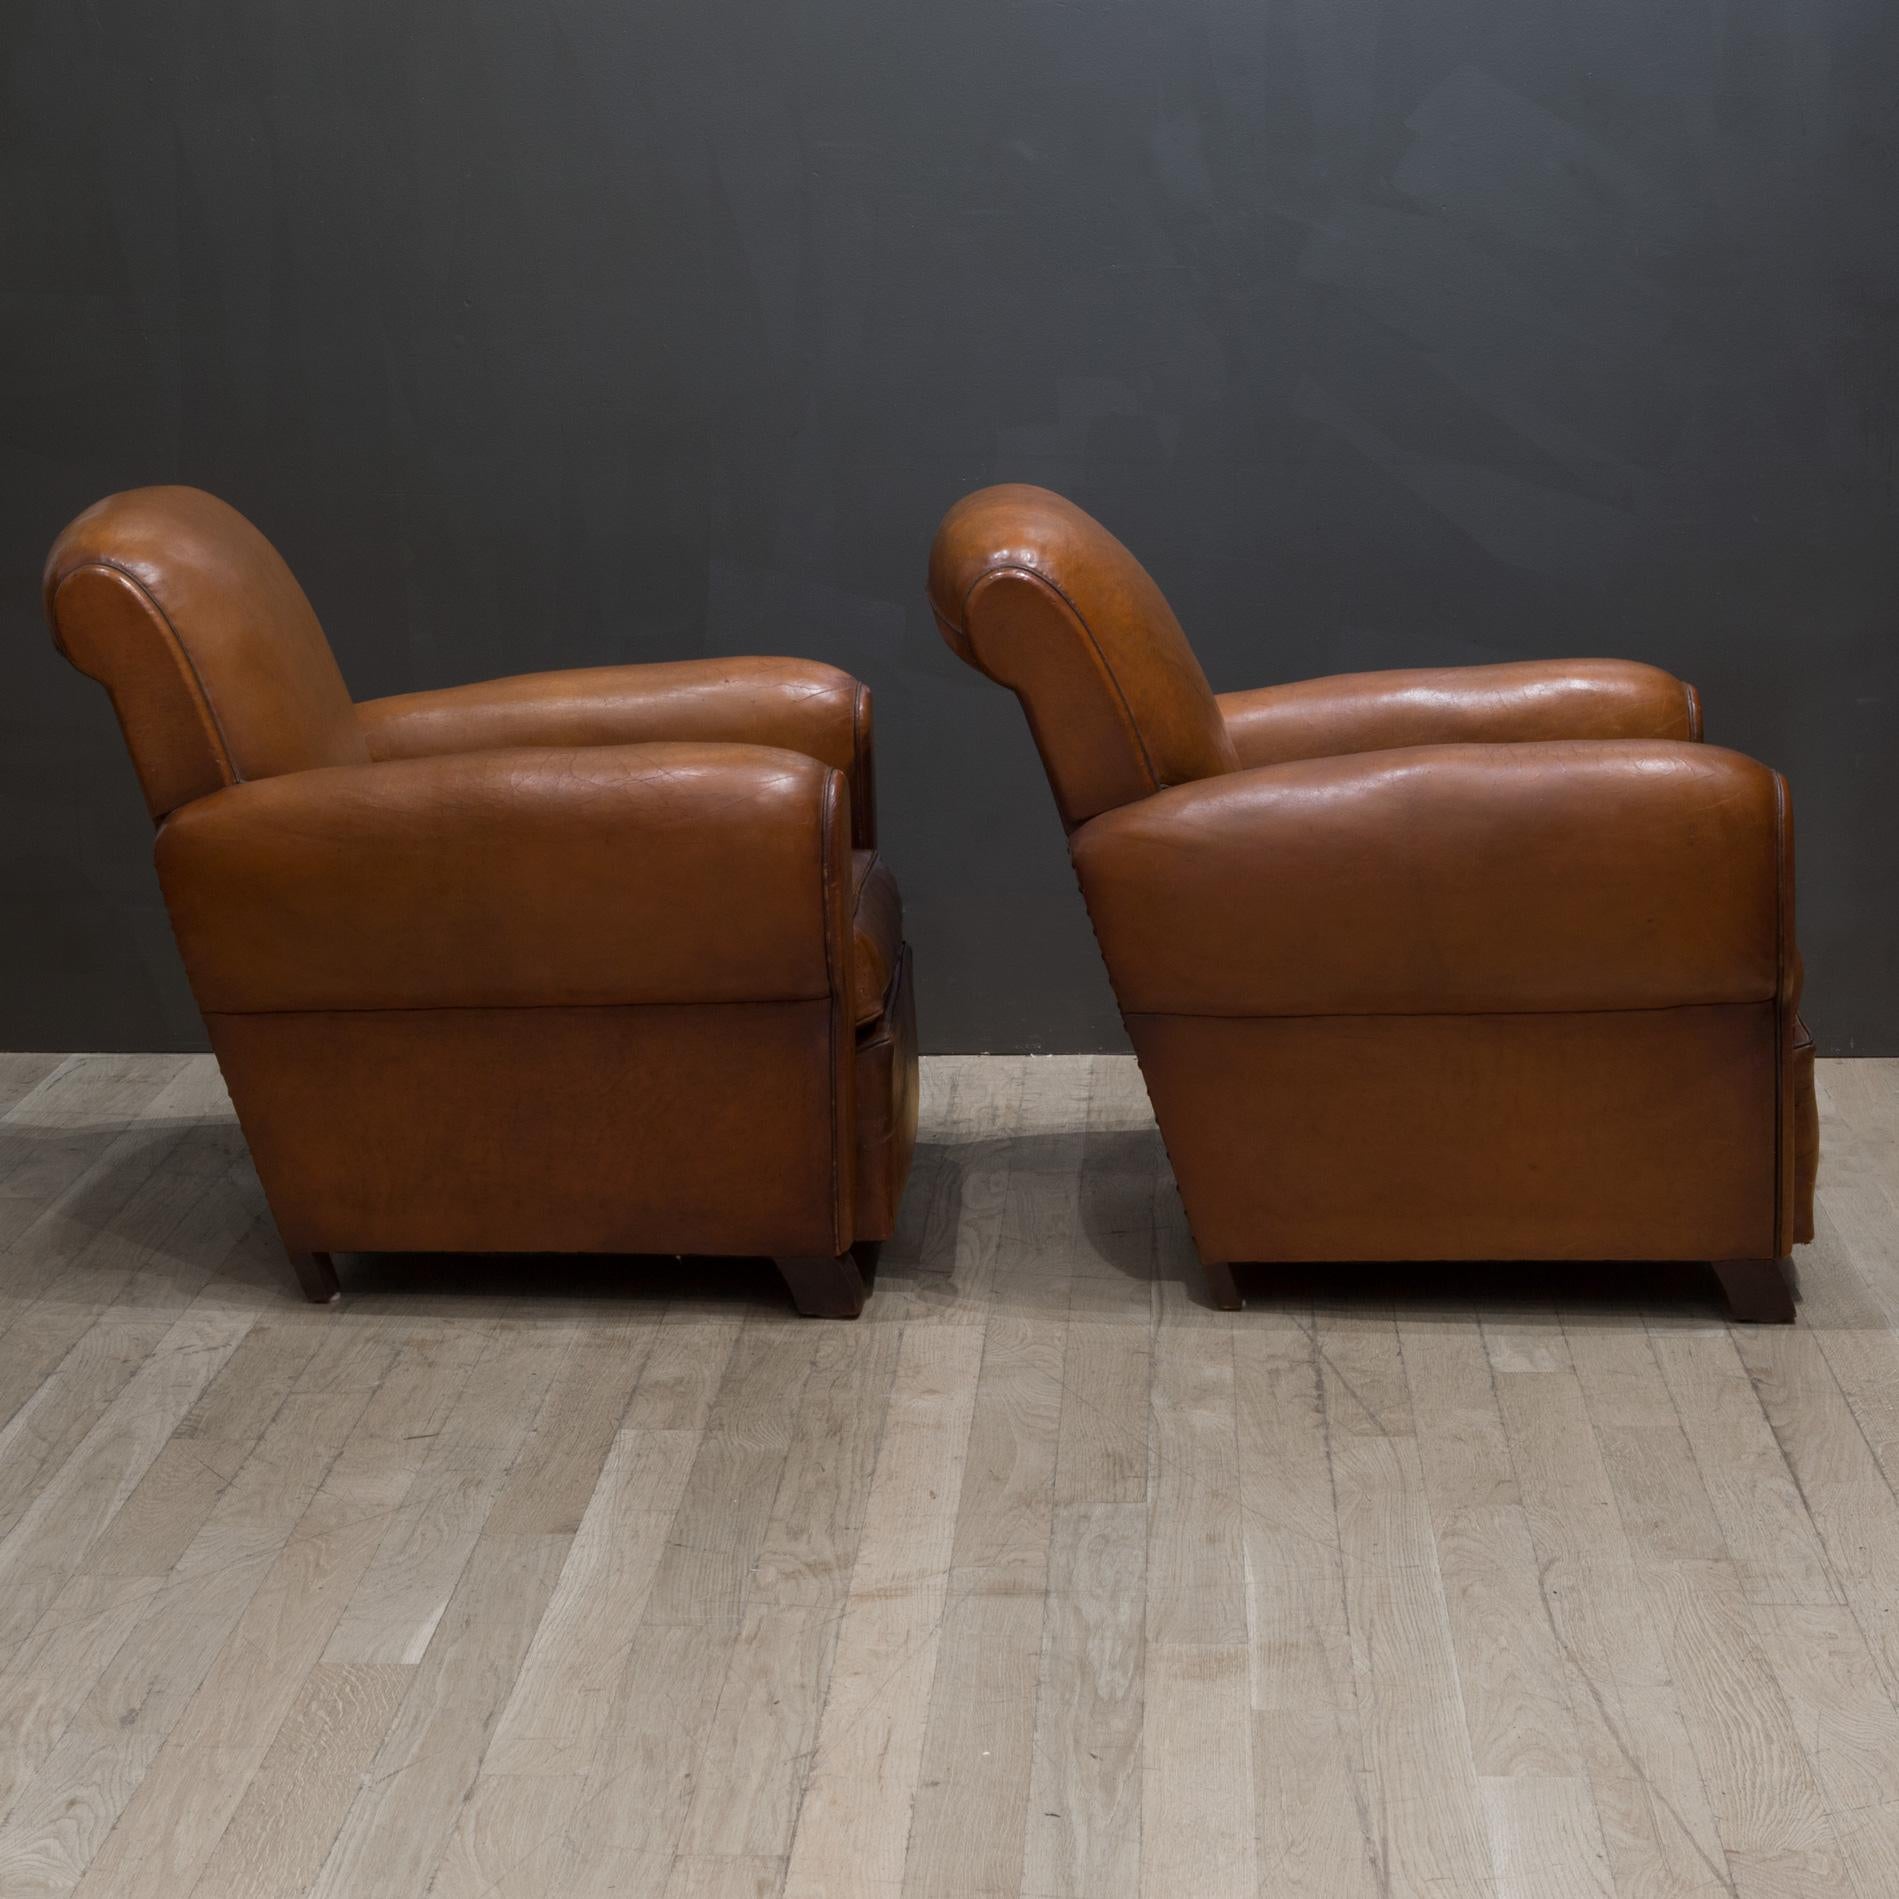 20th Century Pair of French Petite Rollback Sheep Hide Club Chairs, c.1940